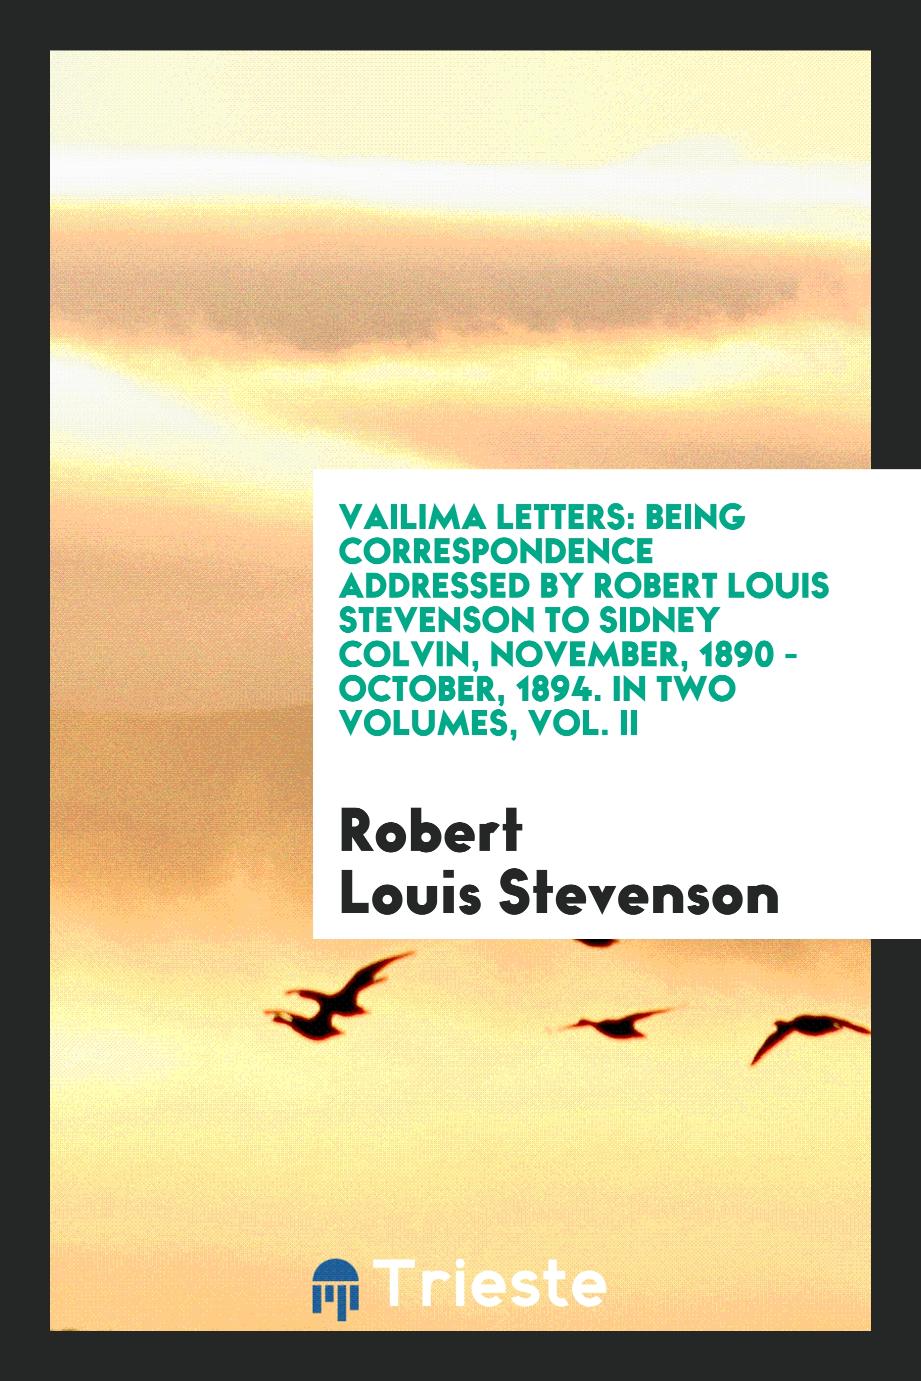 Vailima Letters: Being Correspondence Addressed by Robert Louis Stevenson to Sidney Colvin, November, 1890 - October, 1894. In Two Volumes, Vol. II